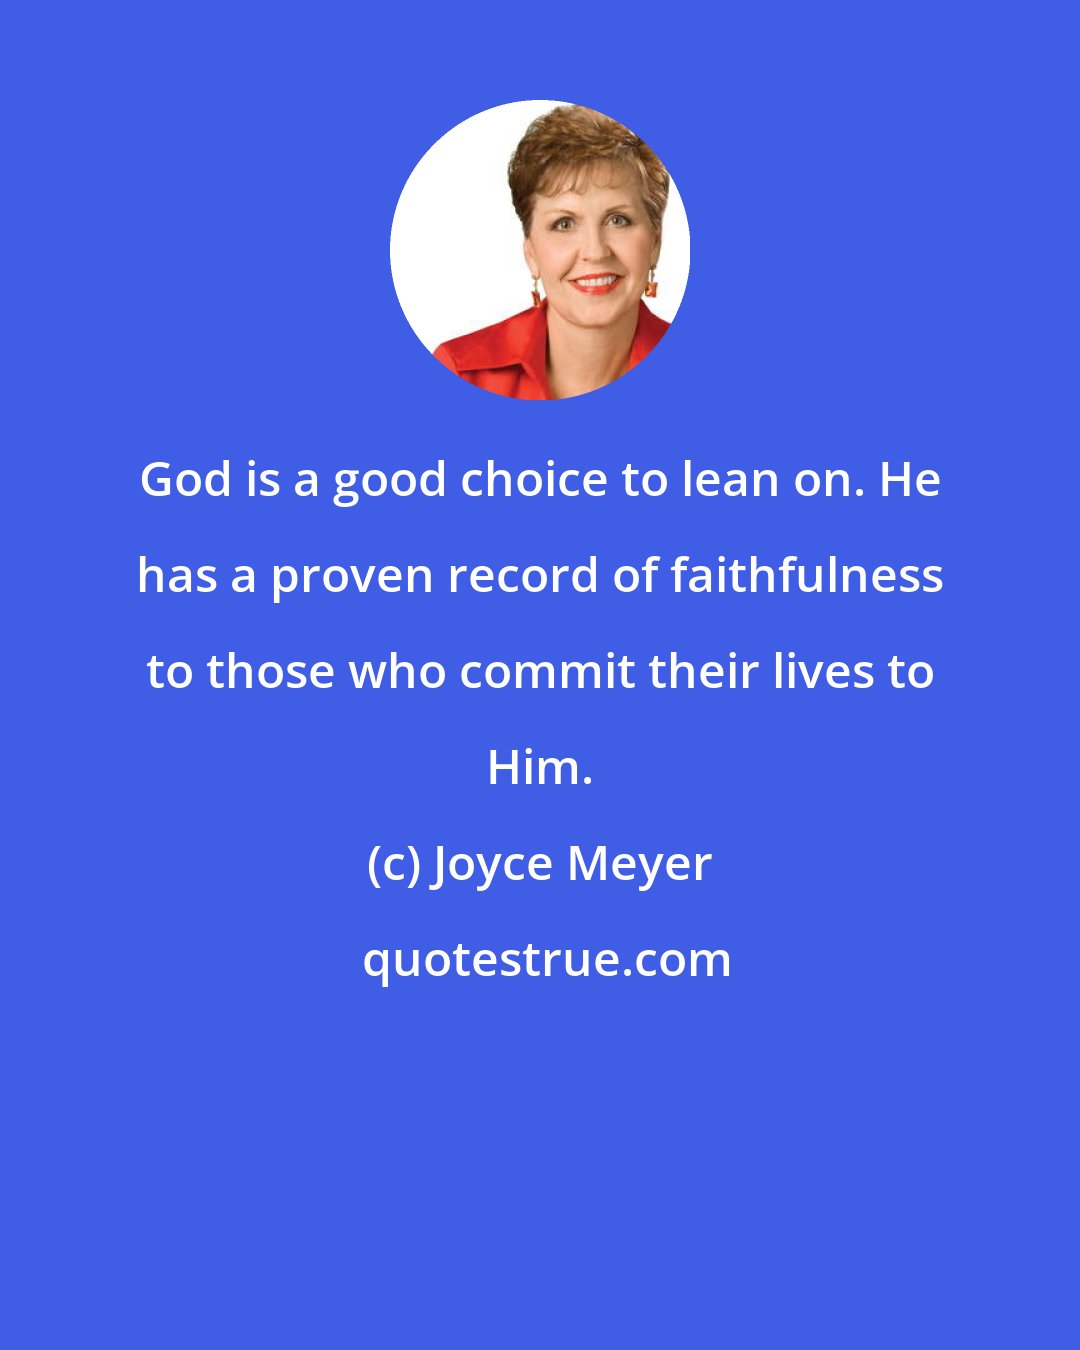 Joyce Meyer: God is a good choice to lean on. He has a proven record of faithfulness to those who commit their lives to Him.